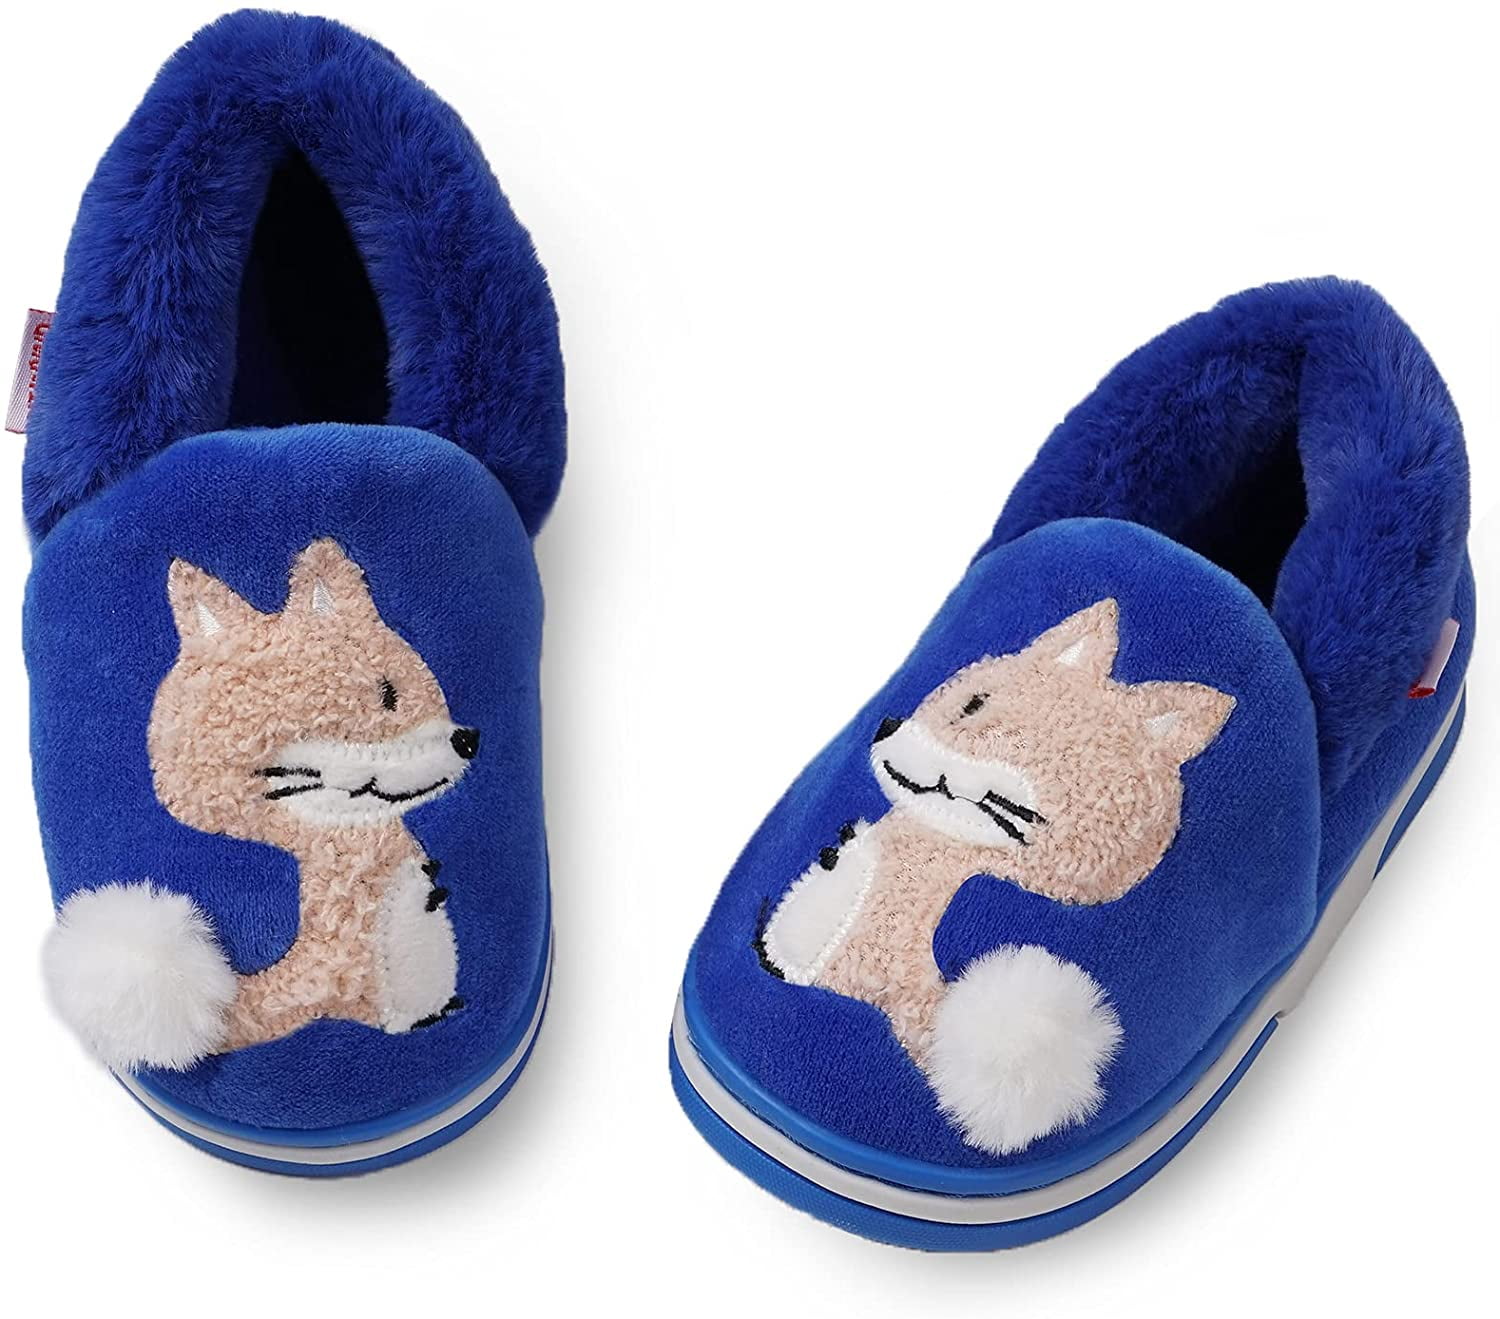 Toddler Slippers Boys Warm Cute Cartoon Slippers Booties Kids Girls Plush Fur Indoor House Home Shoes 